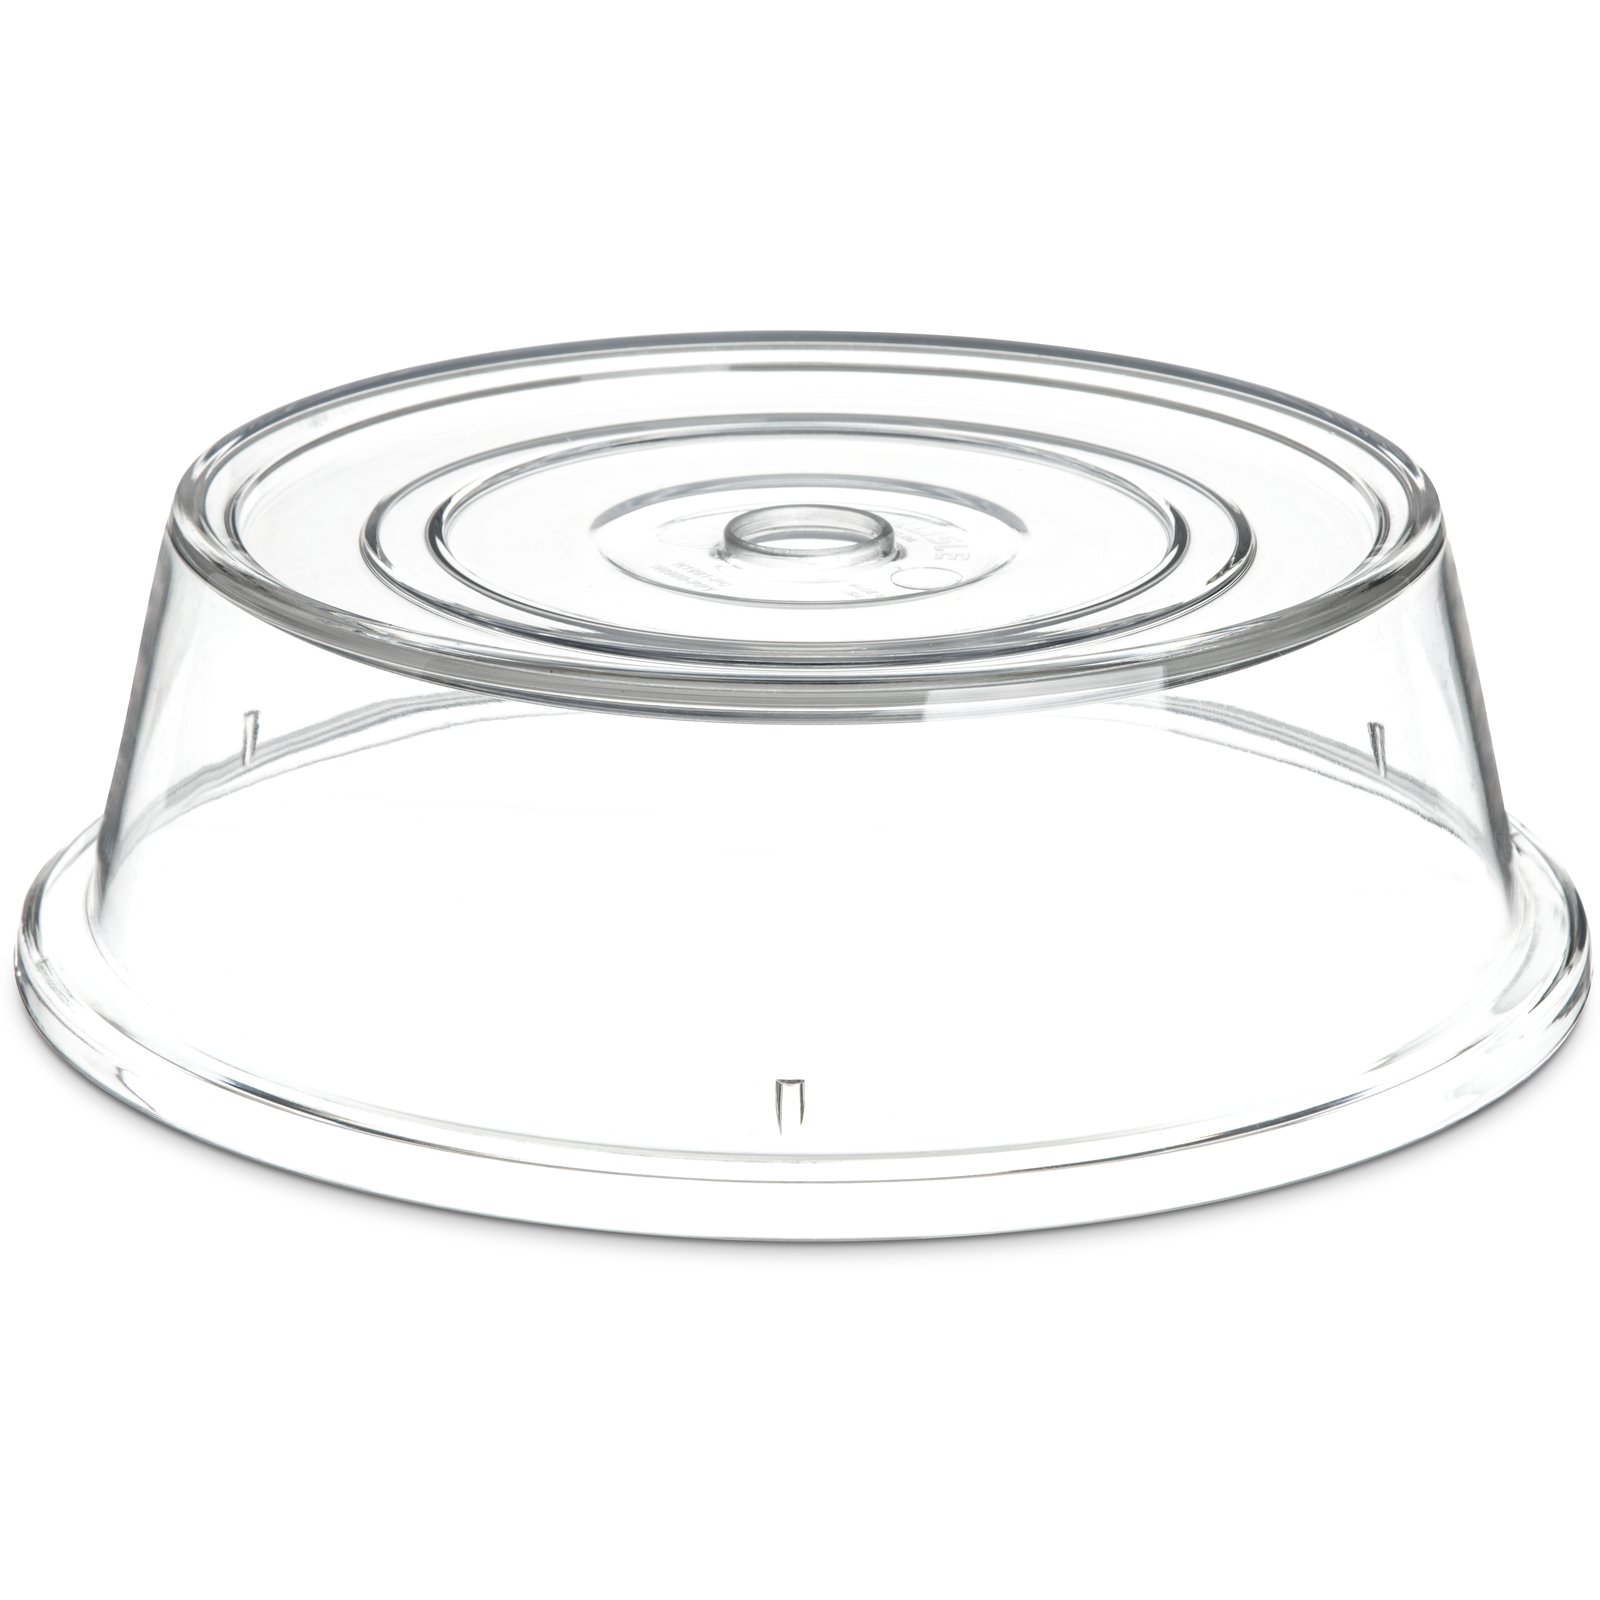 Choice 9 Clear Polycarbonate Plate Cover - 12/Case